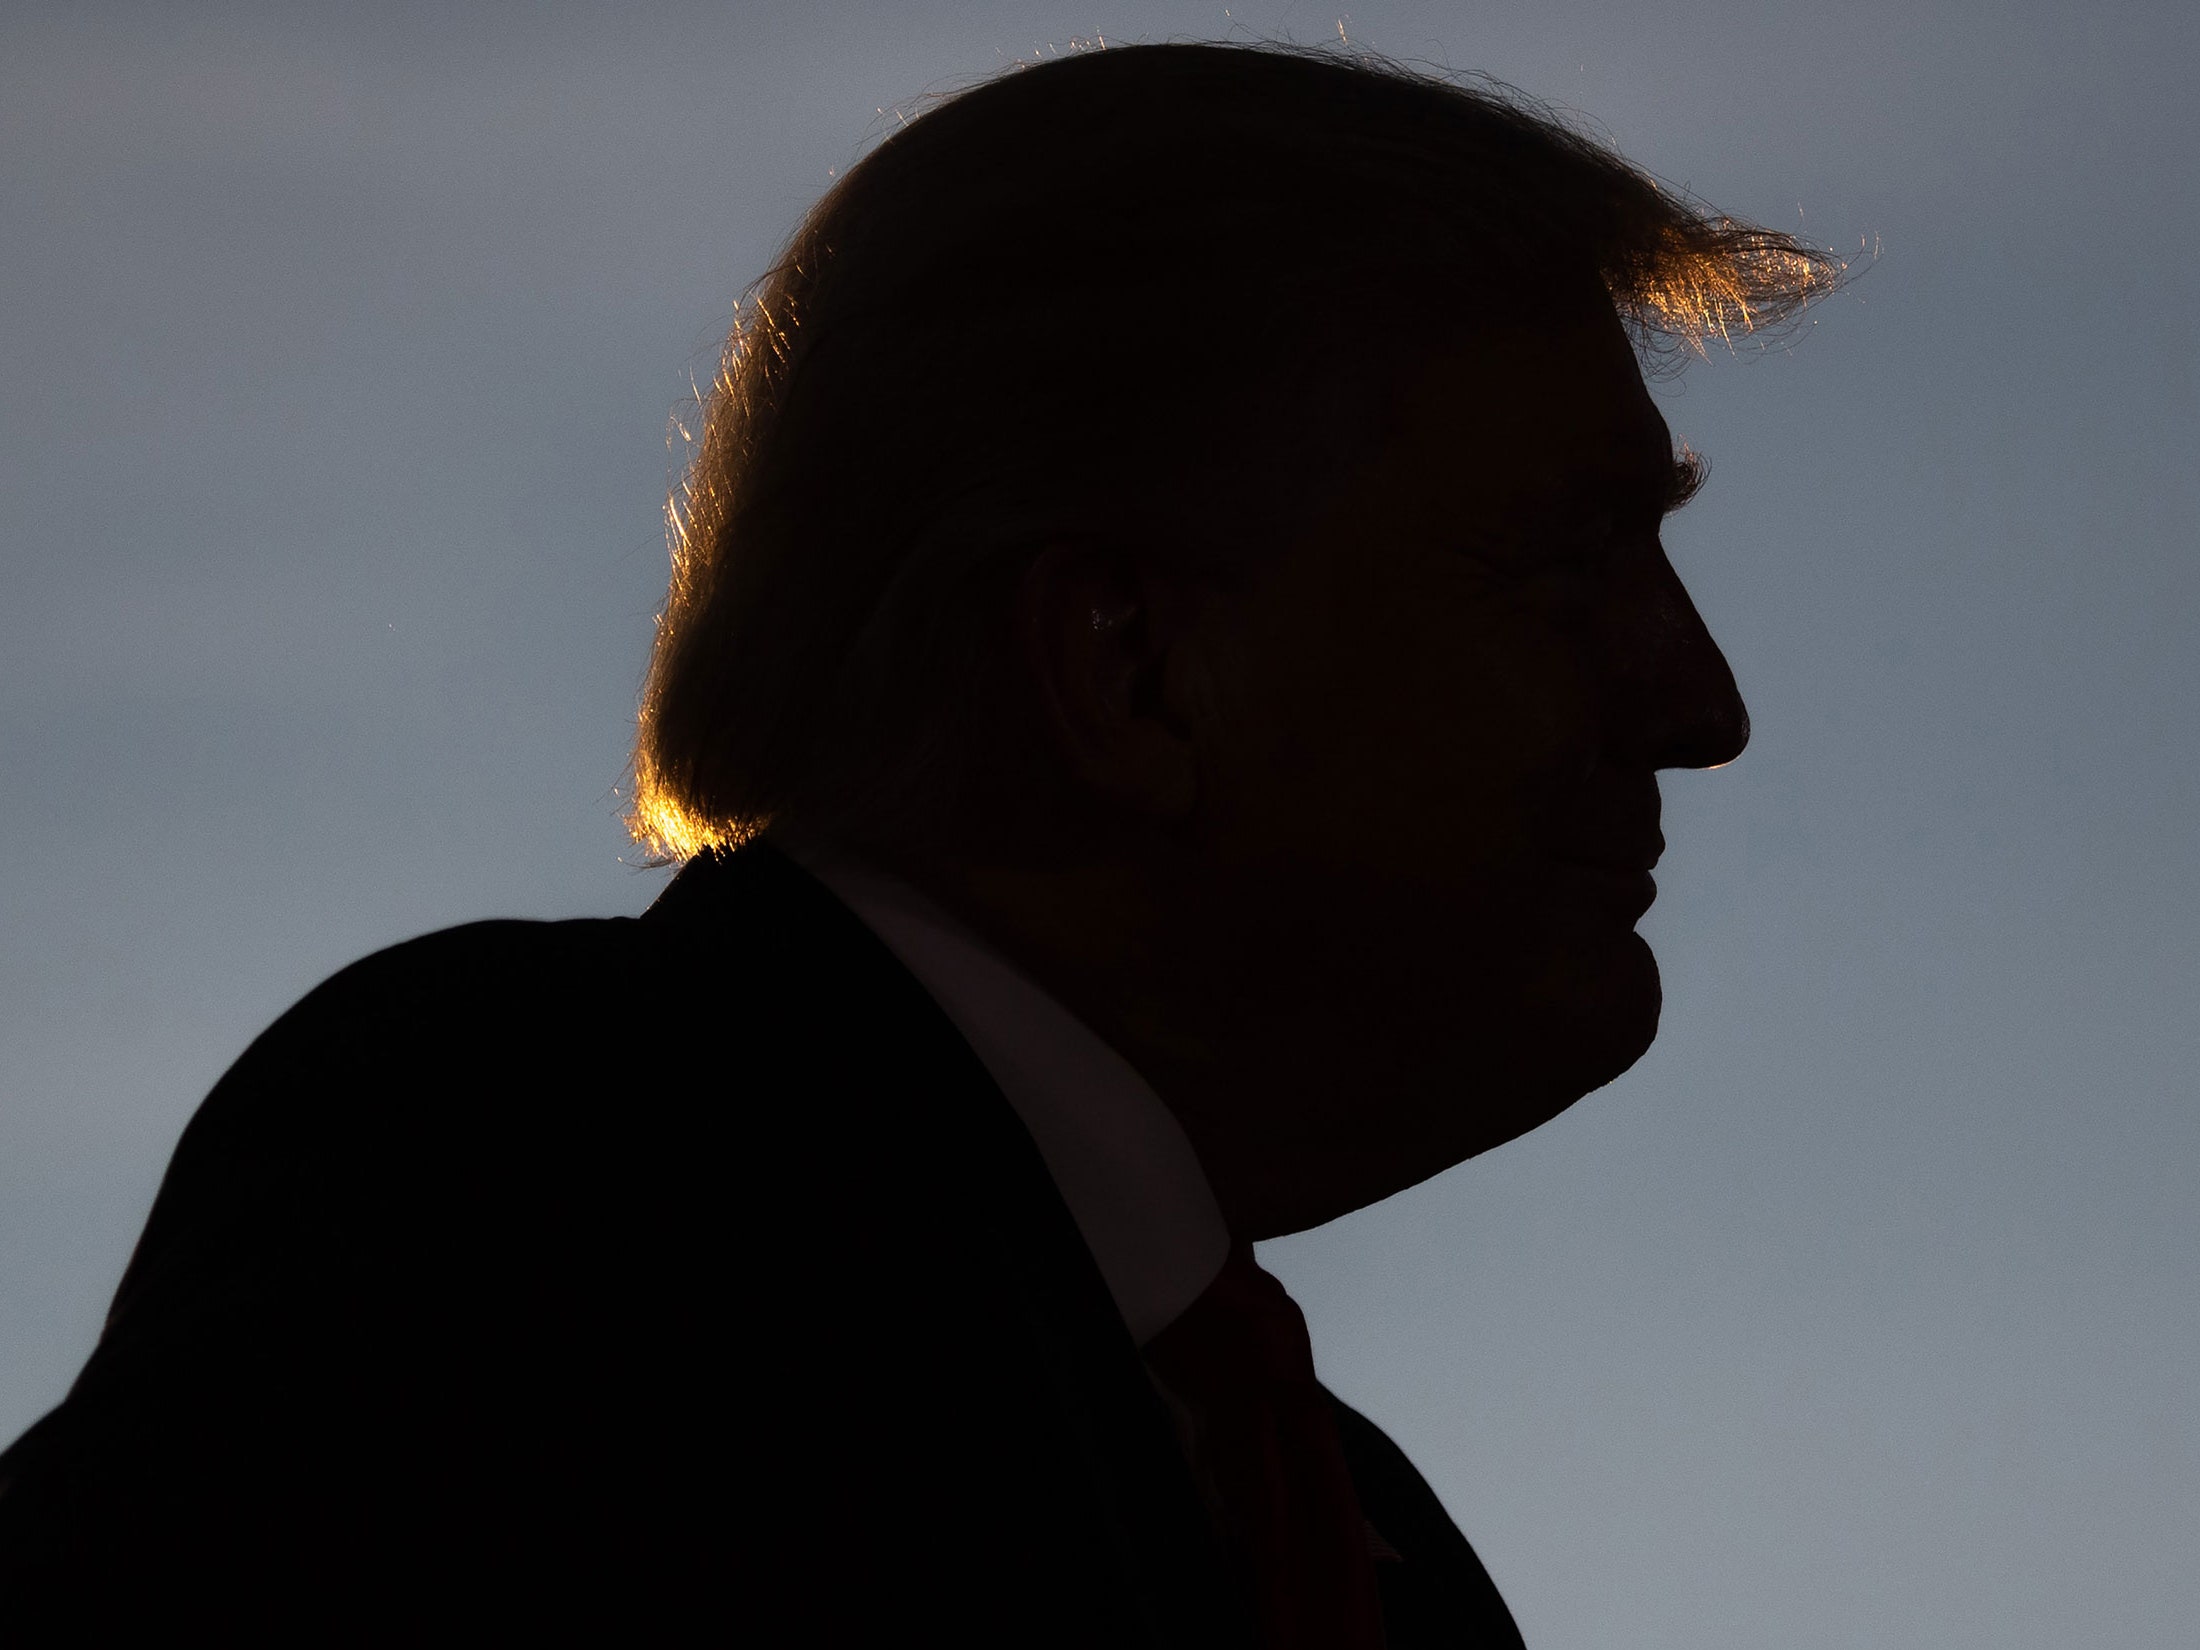 The silhouette of Former President Donald Trump